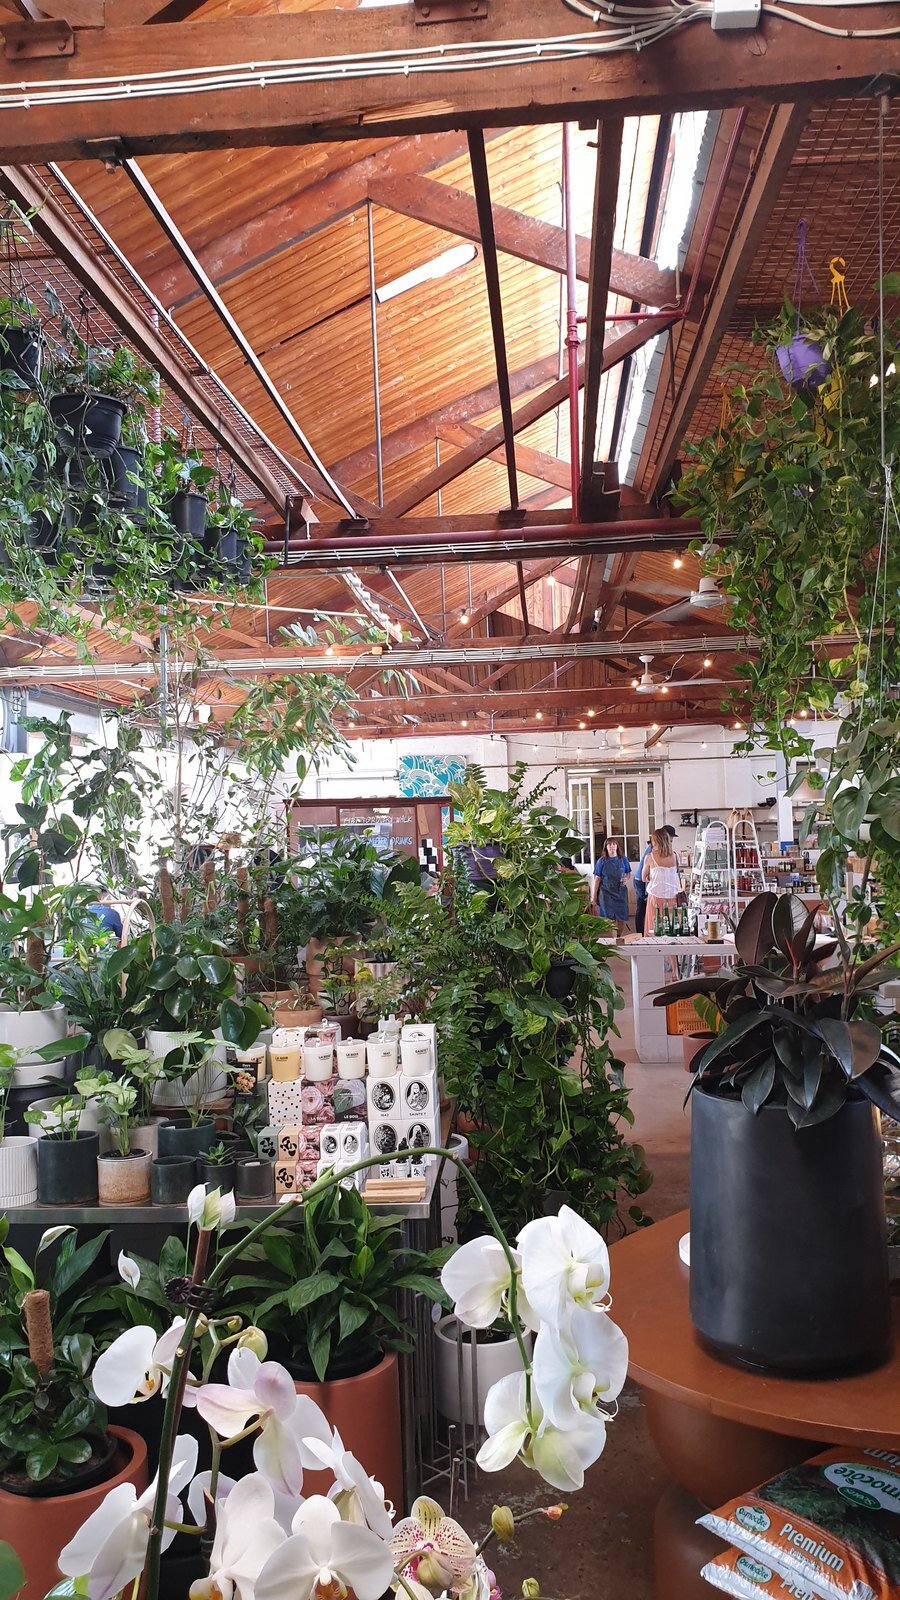 The plant nursery and restaurant at CIBI